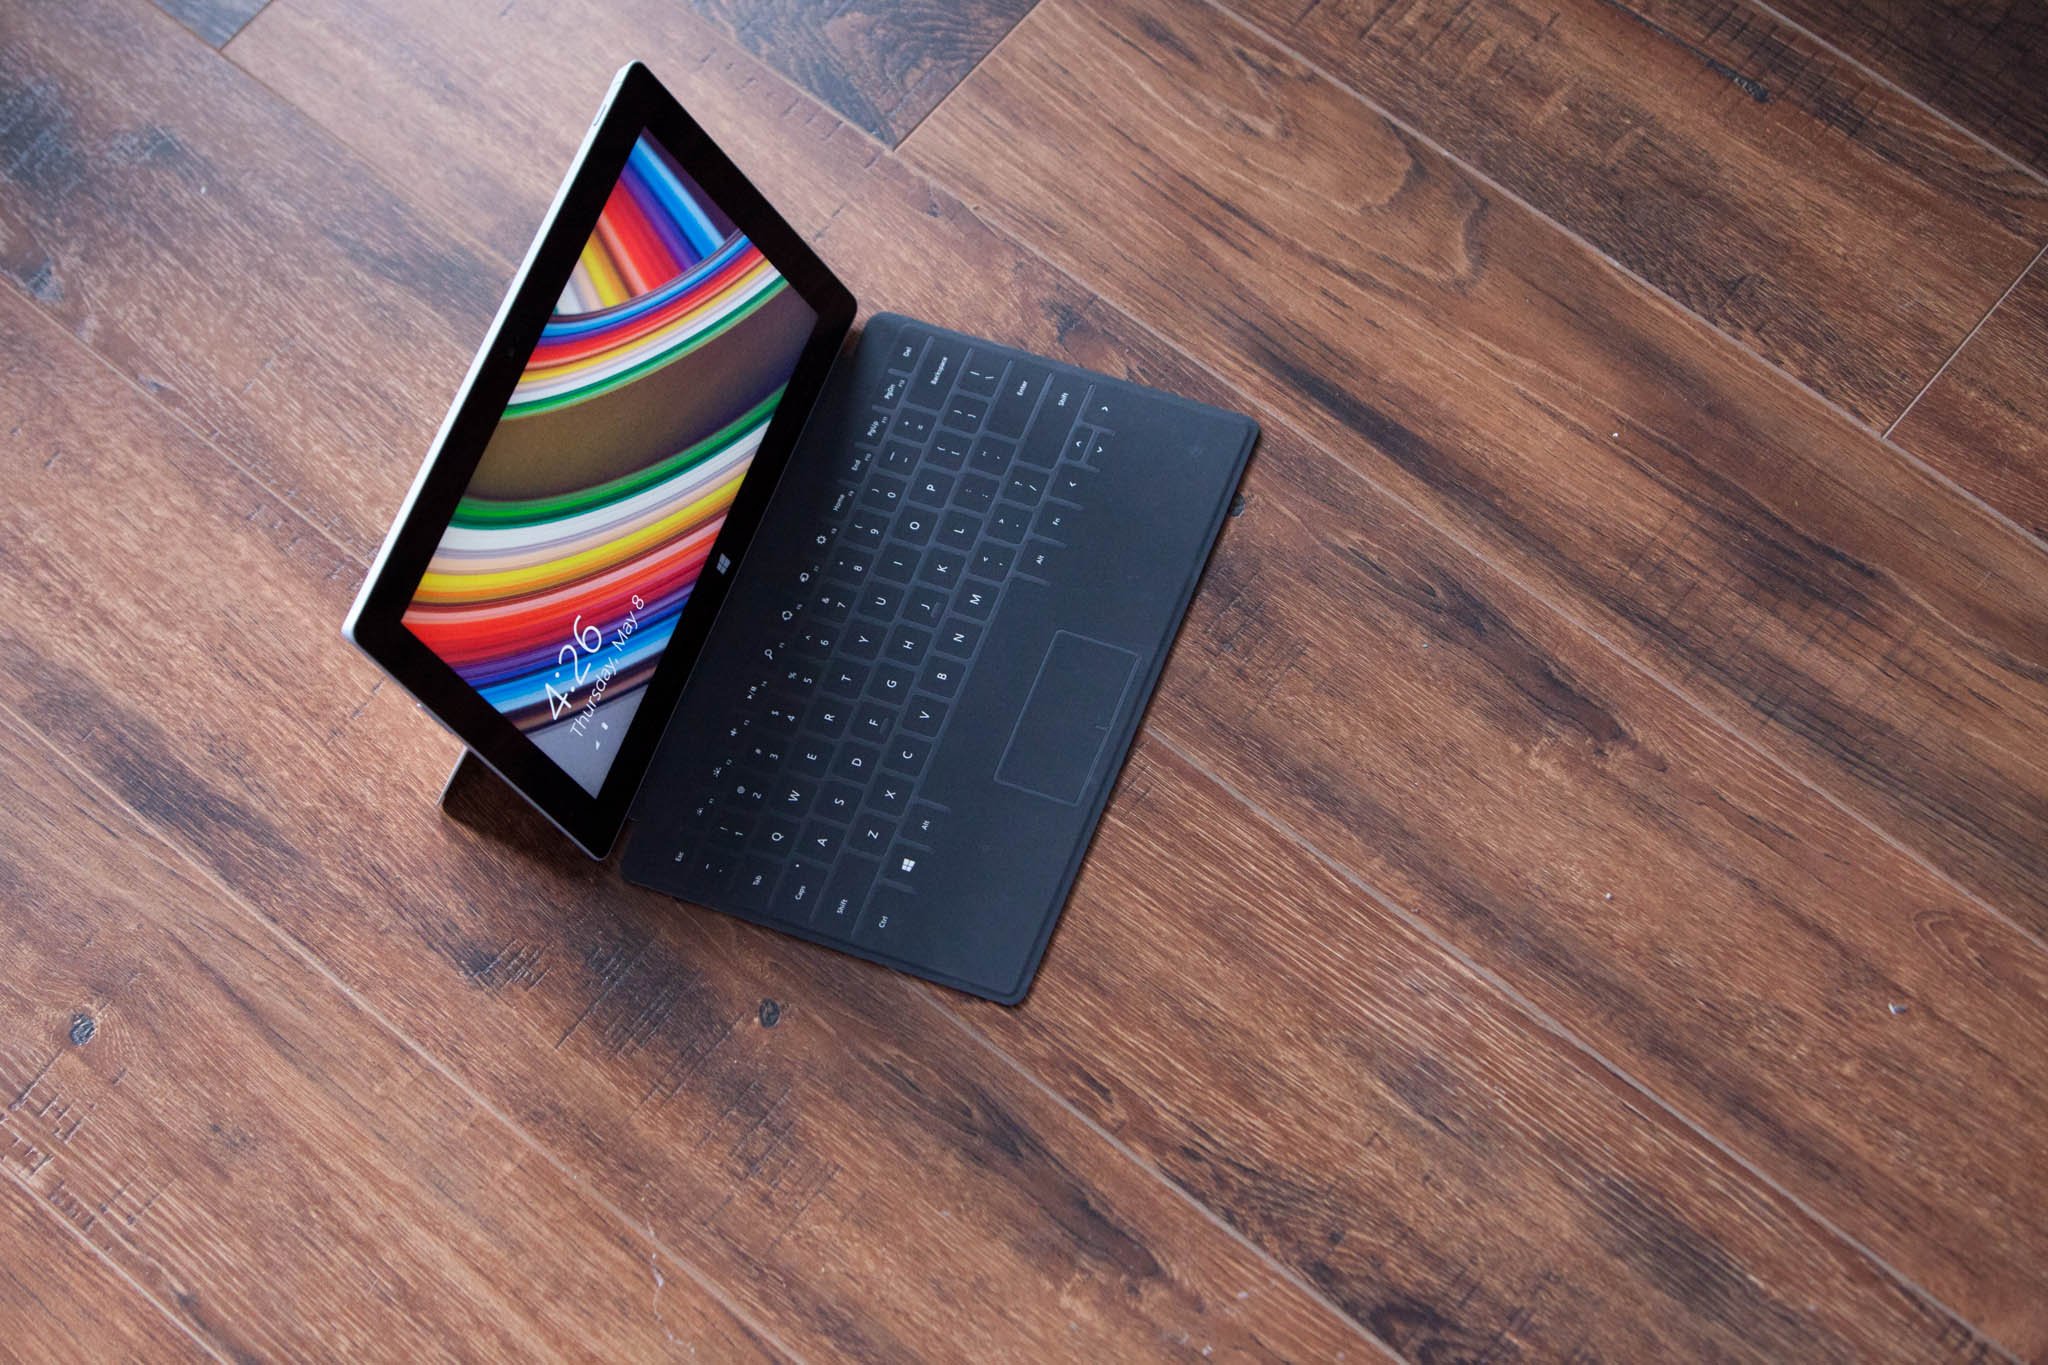 Microsoft selling refurbished Surface 2 for 99 on eBay